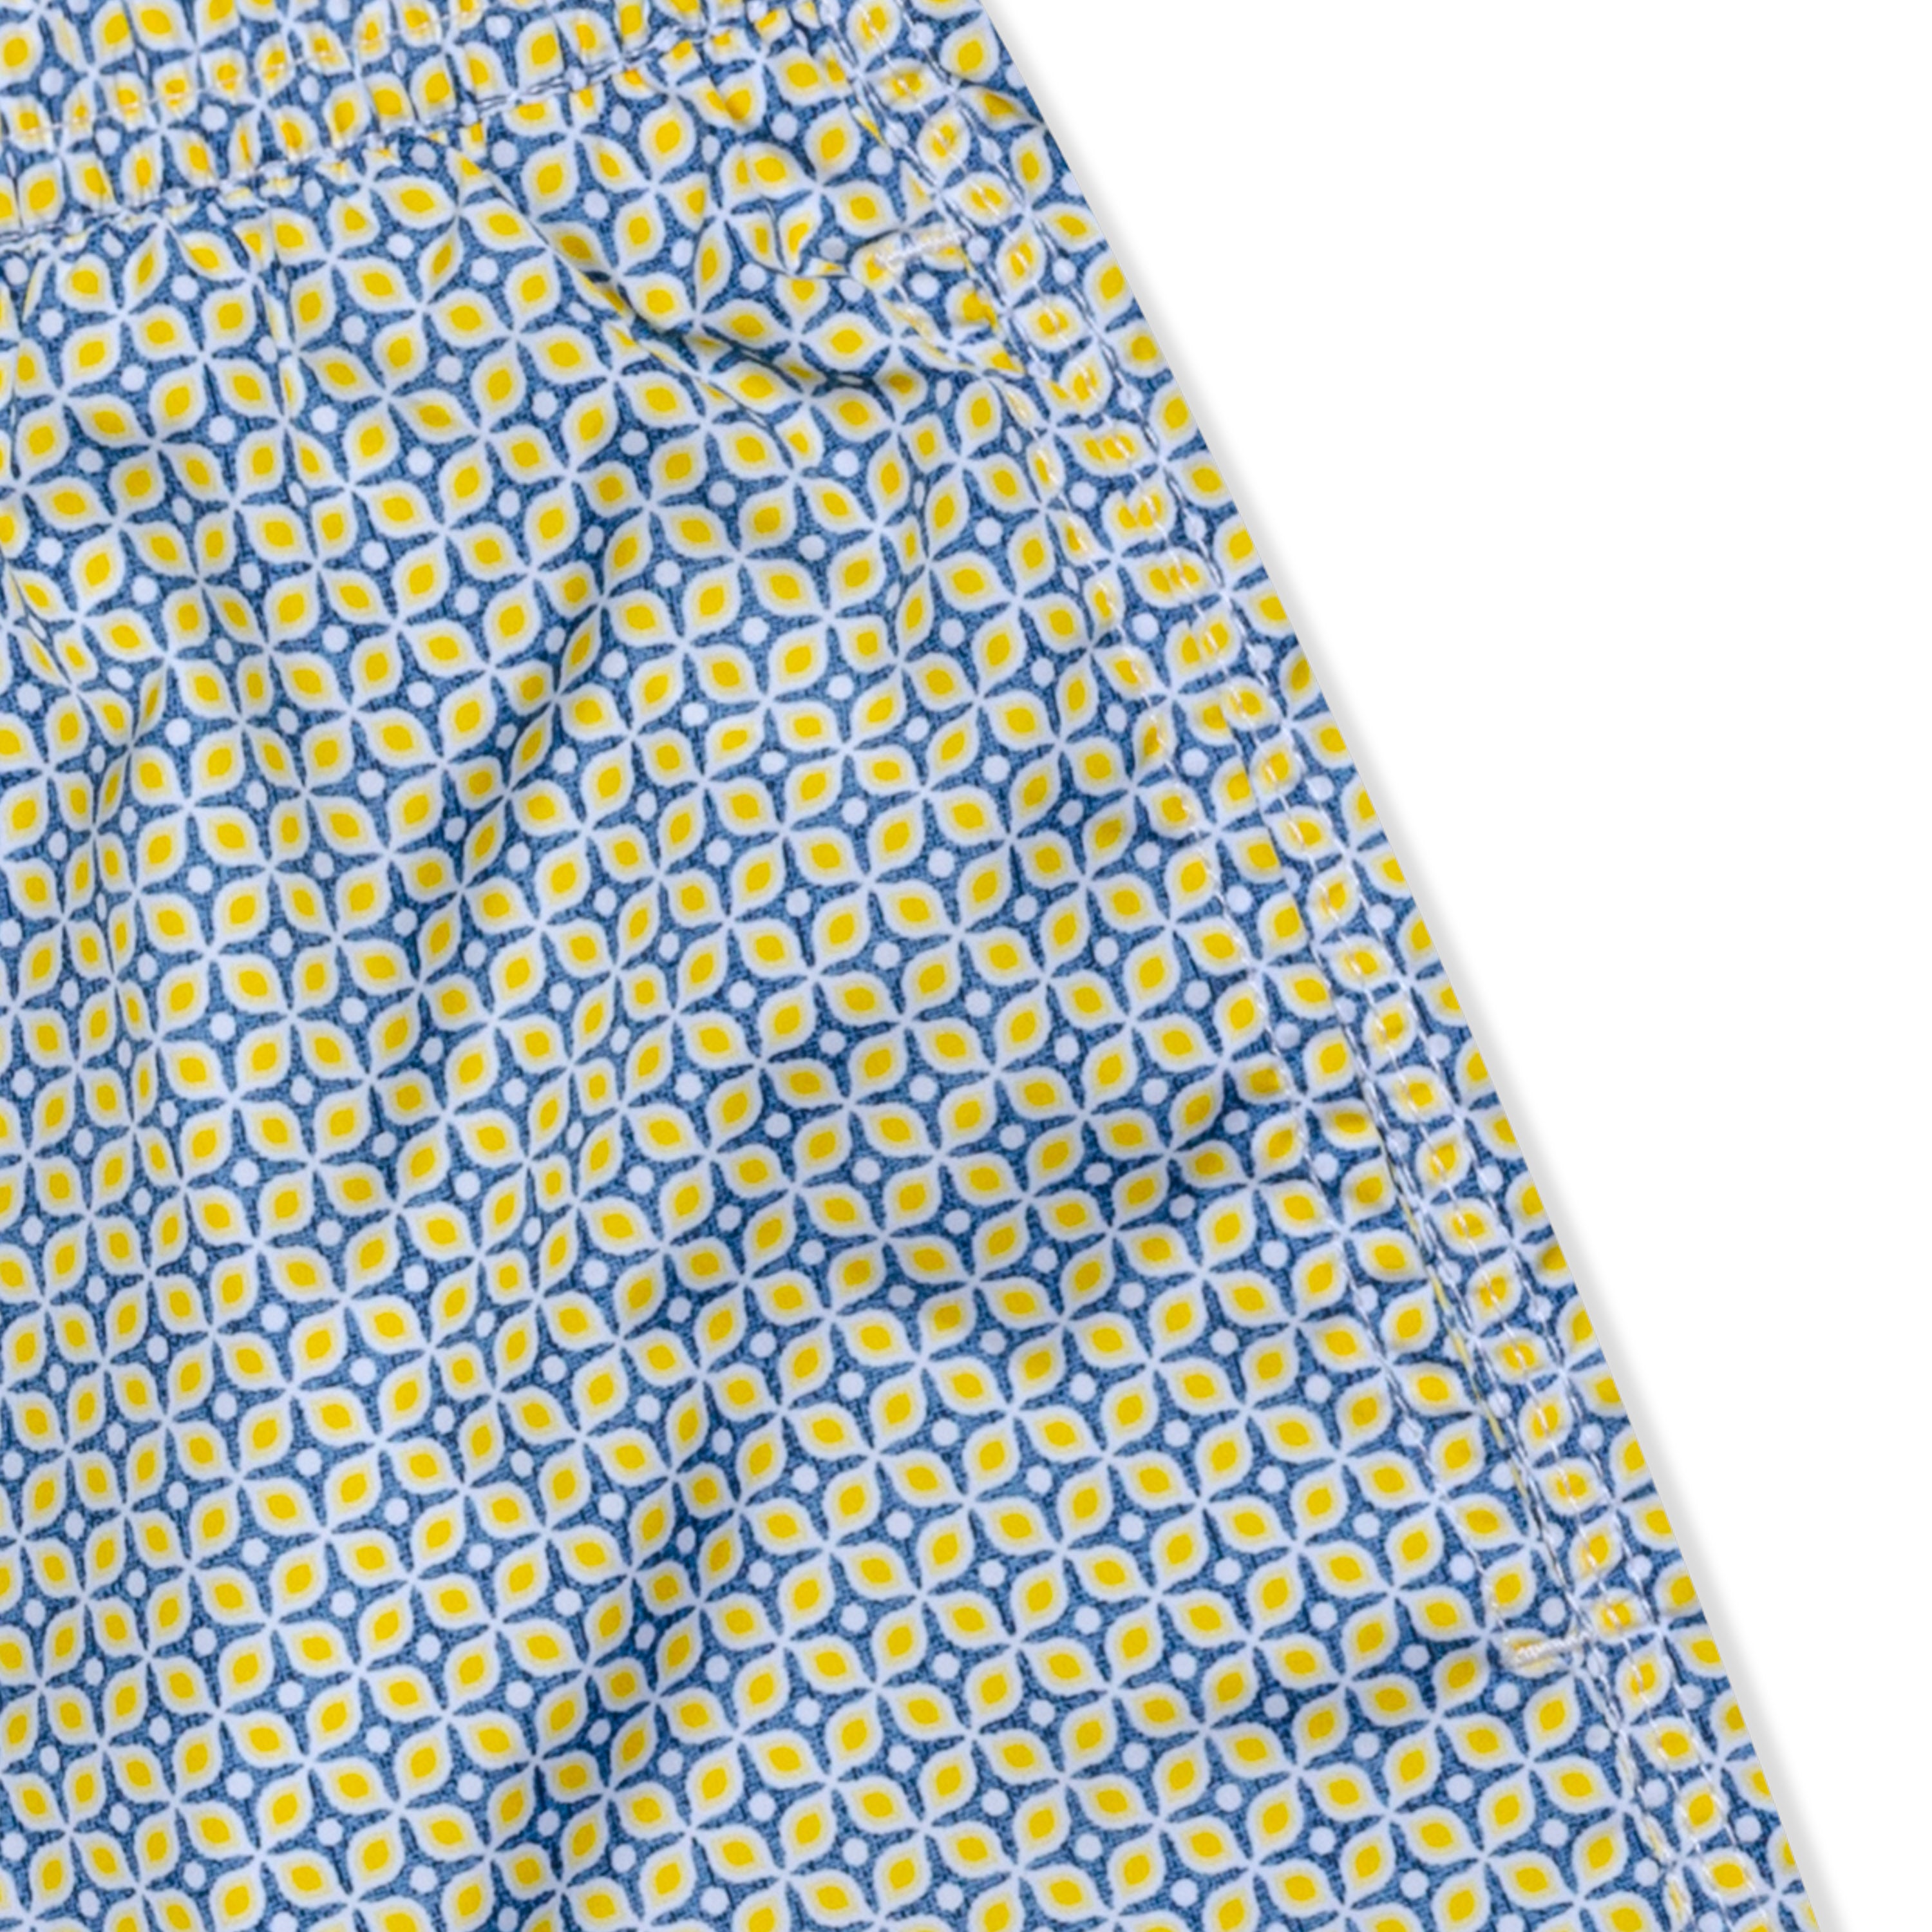 FEDELI Italy Blue-Yellow Floral Dot Madeira Airstop Swim Shorts Trunks NEW 2XL FEDELI